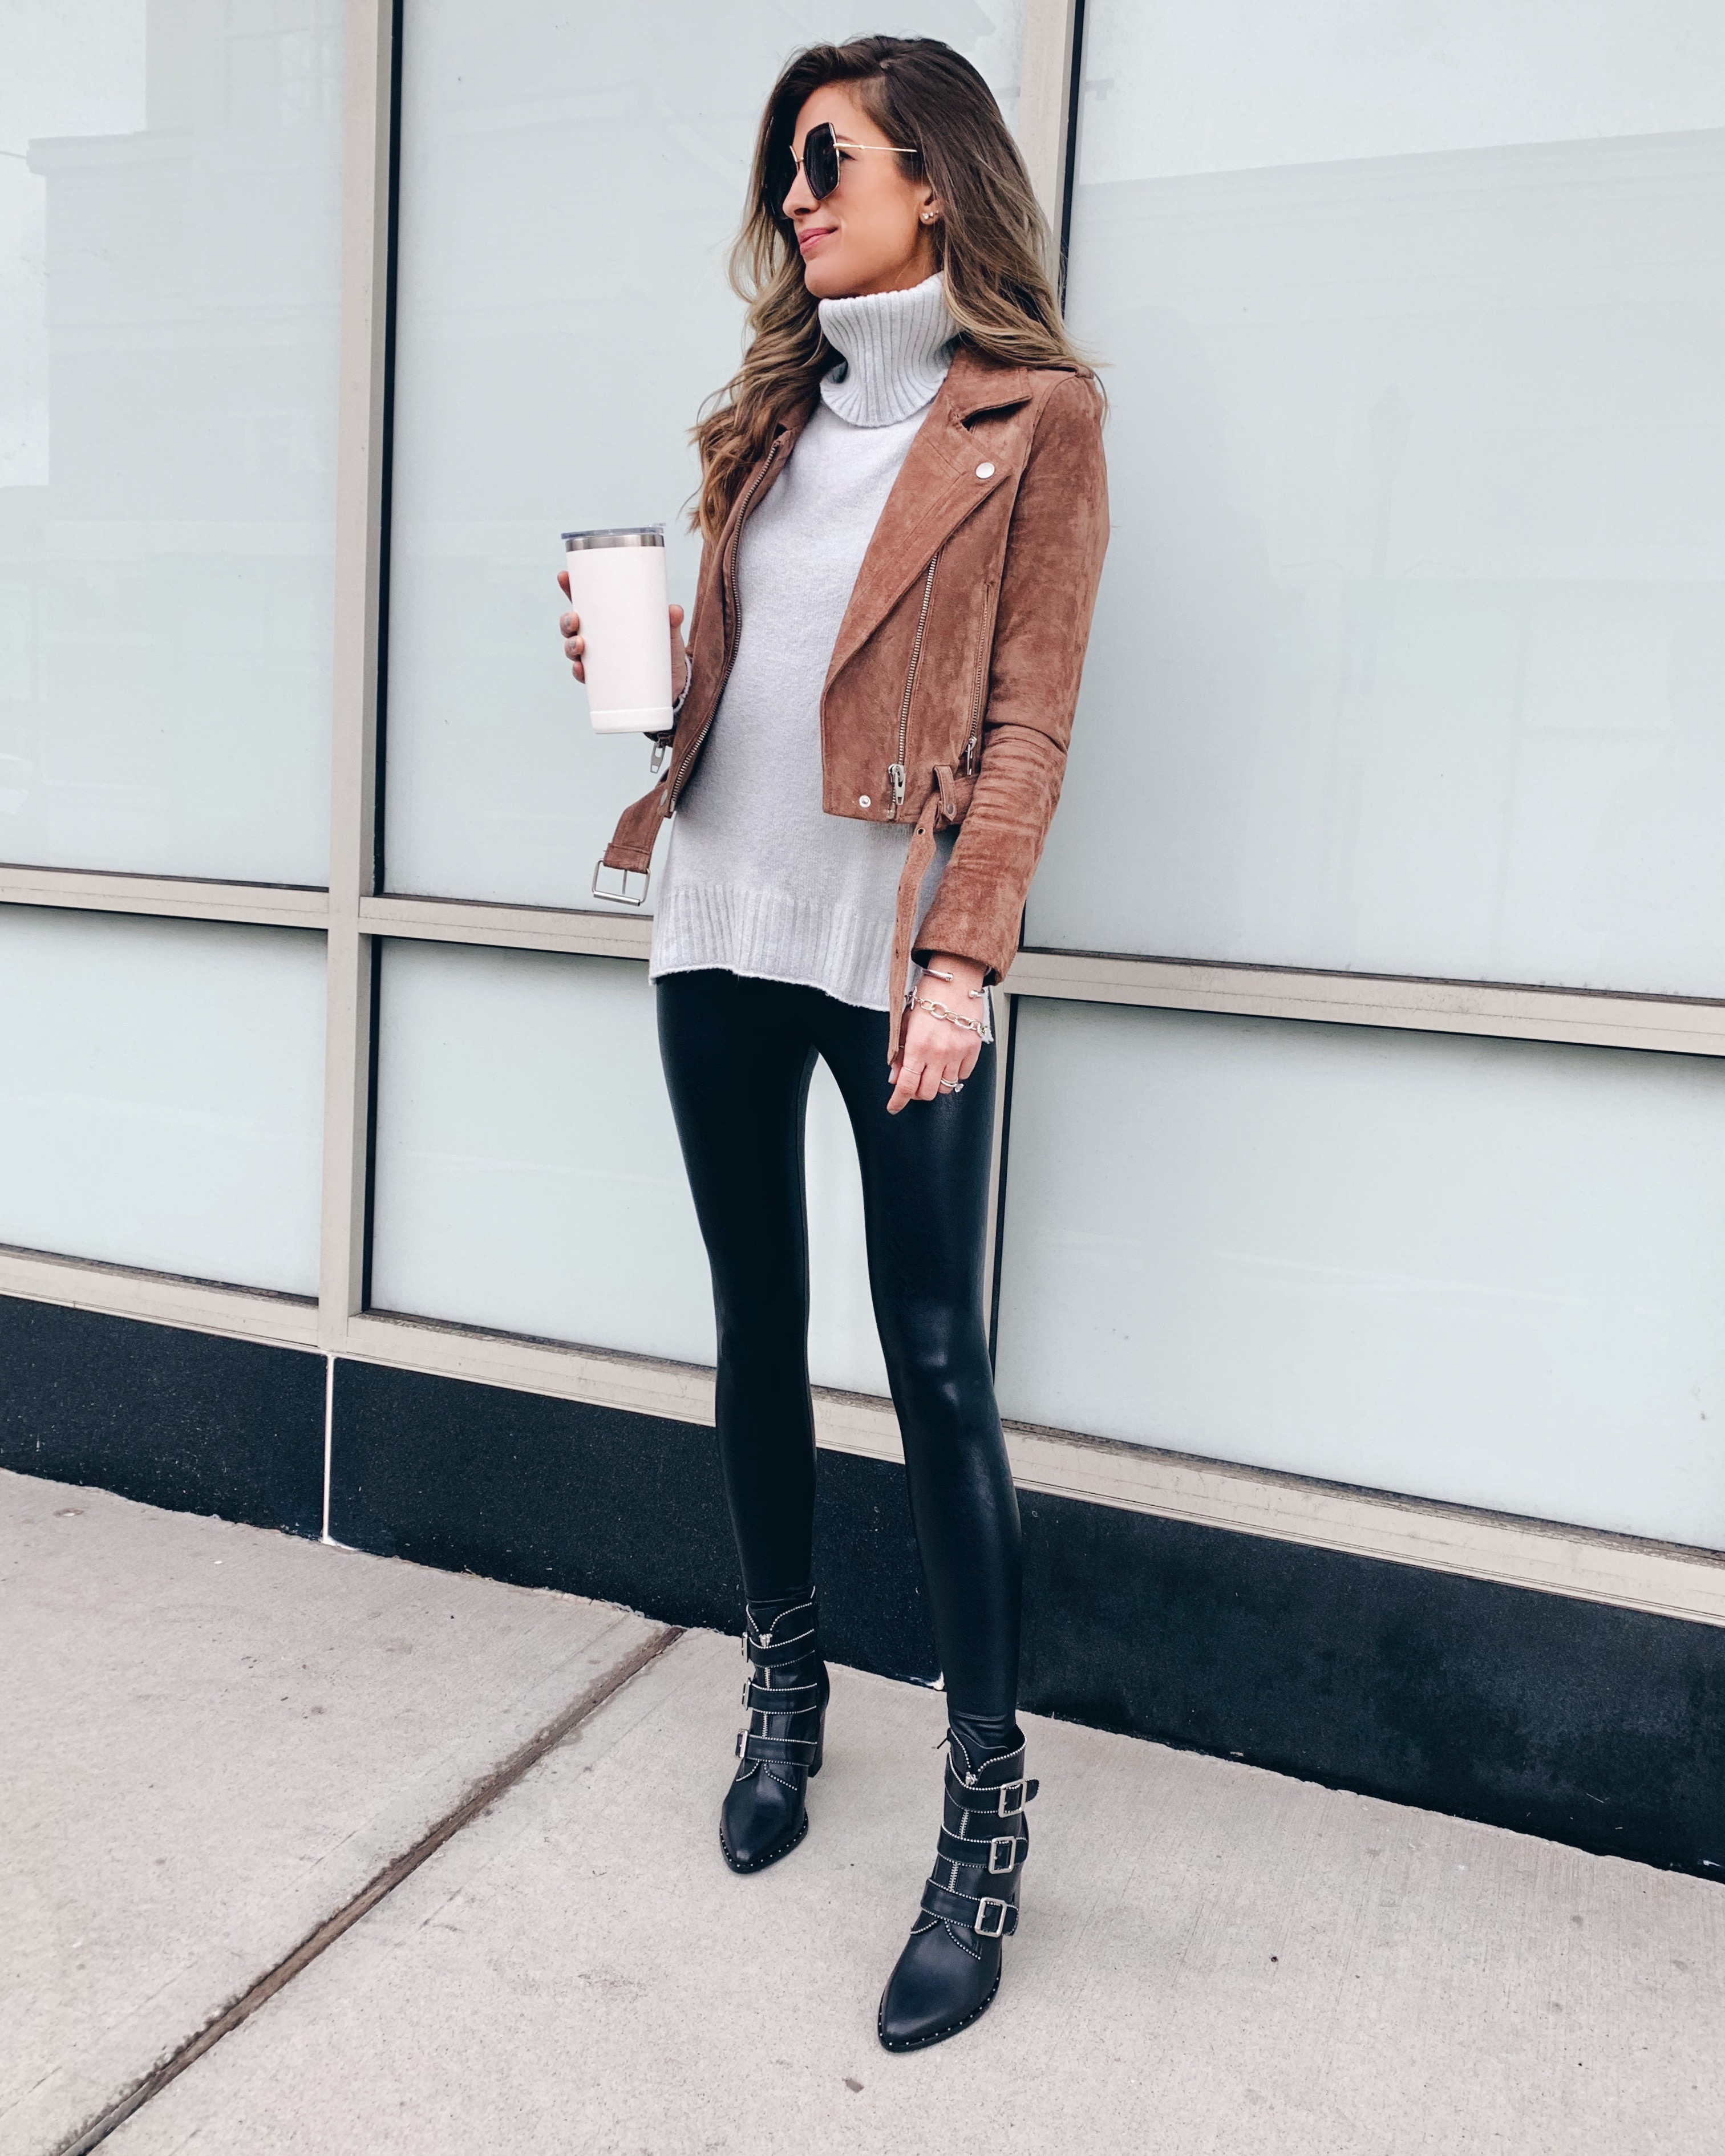 How to style FAUX LEATHER LEGGINGS